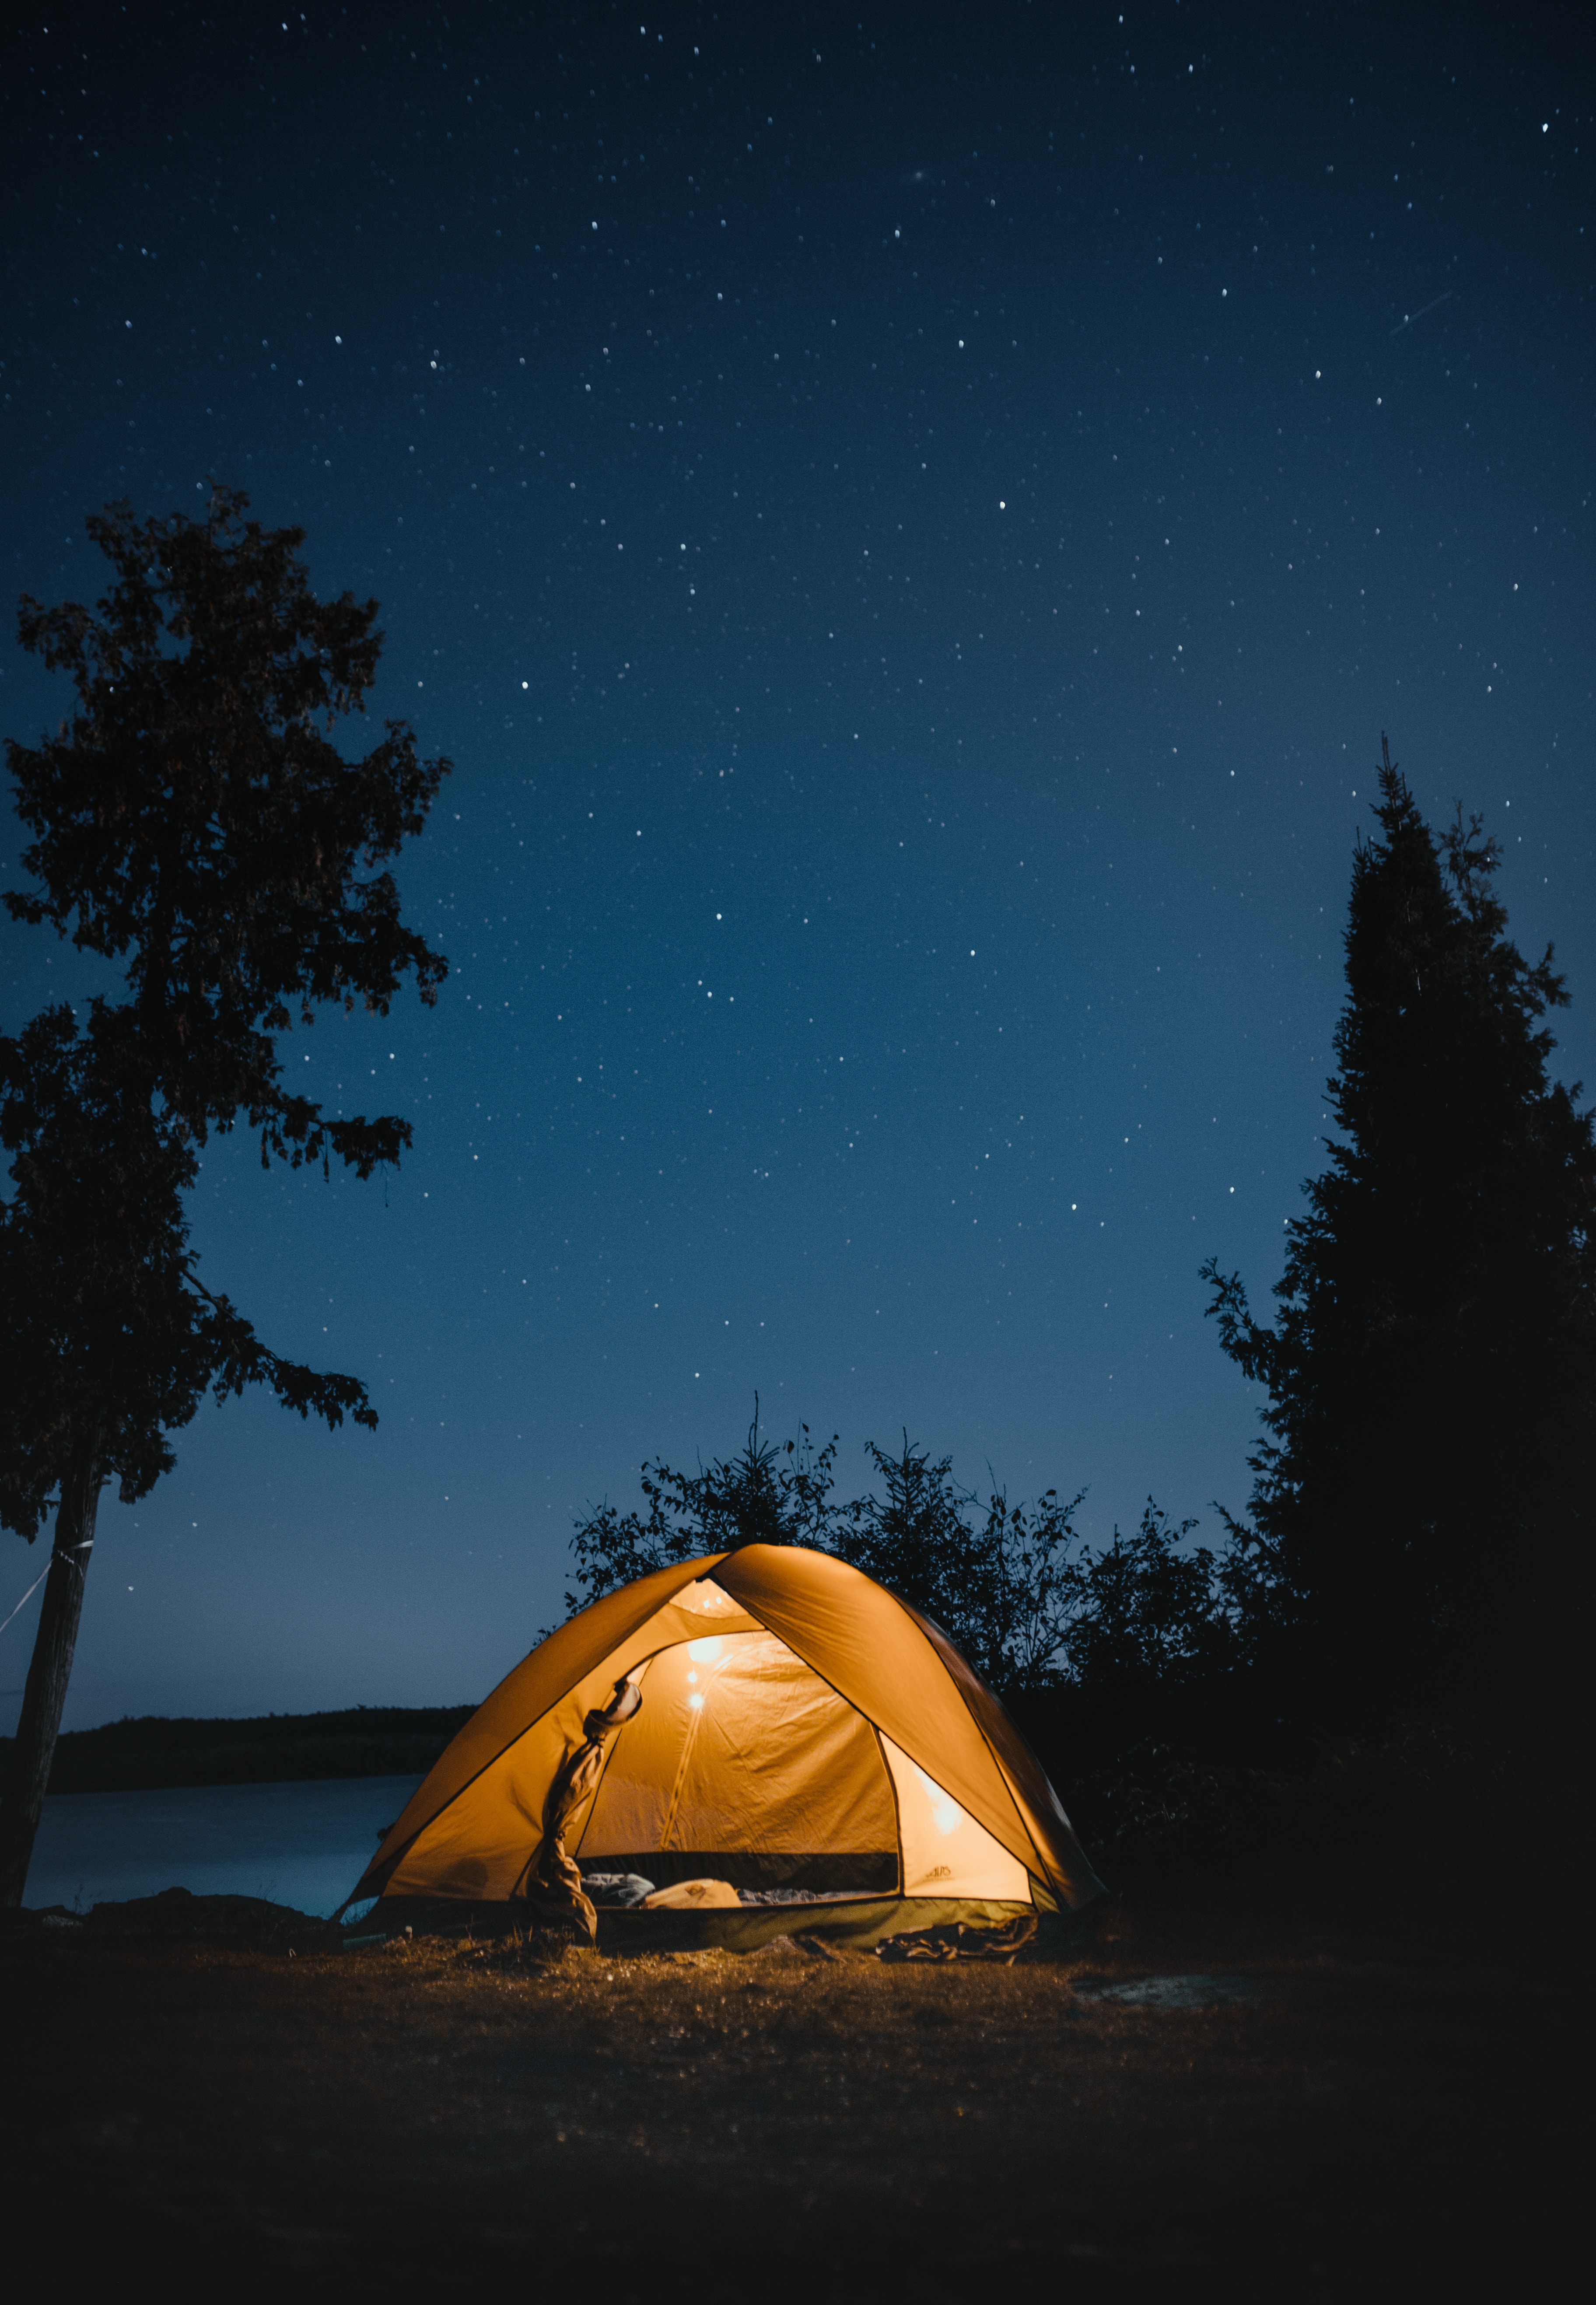 125104 download wallpaper starry sky, tent, nature, night, journey, camping, campsite screensavers and pictures for free